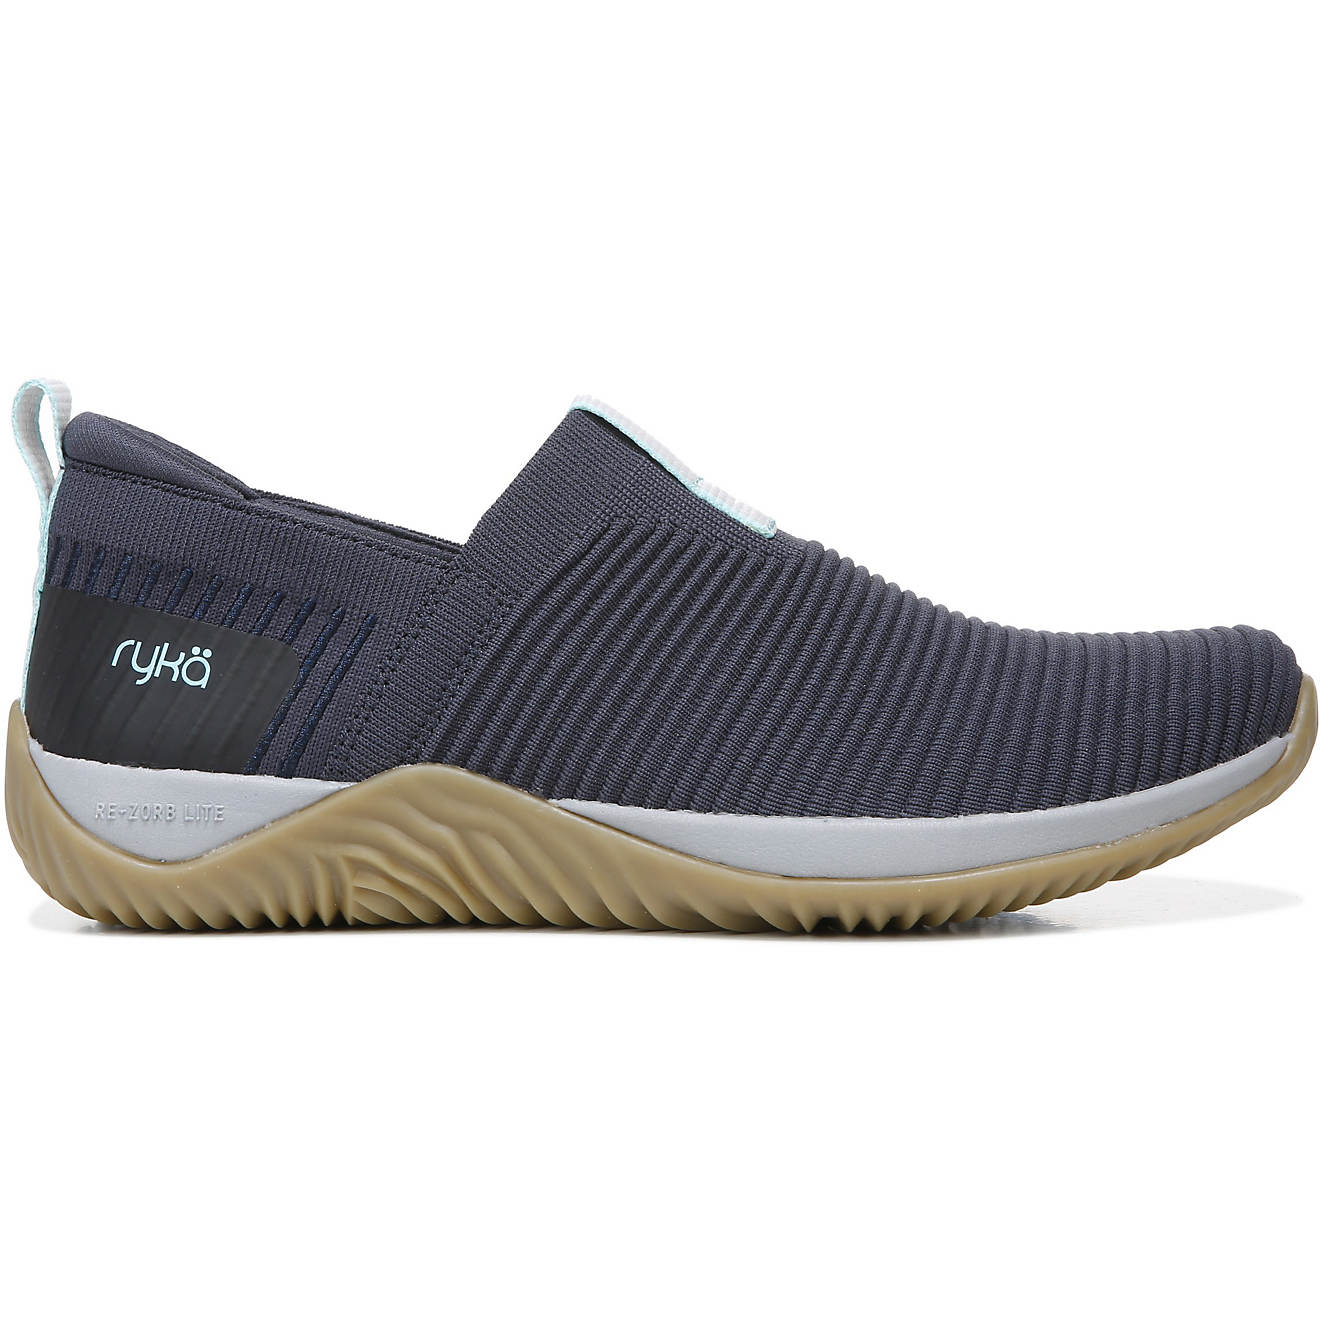 Ryka Women's Echo Knit Slip-On Shoes | Free Shipping at Academy